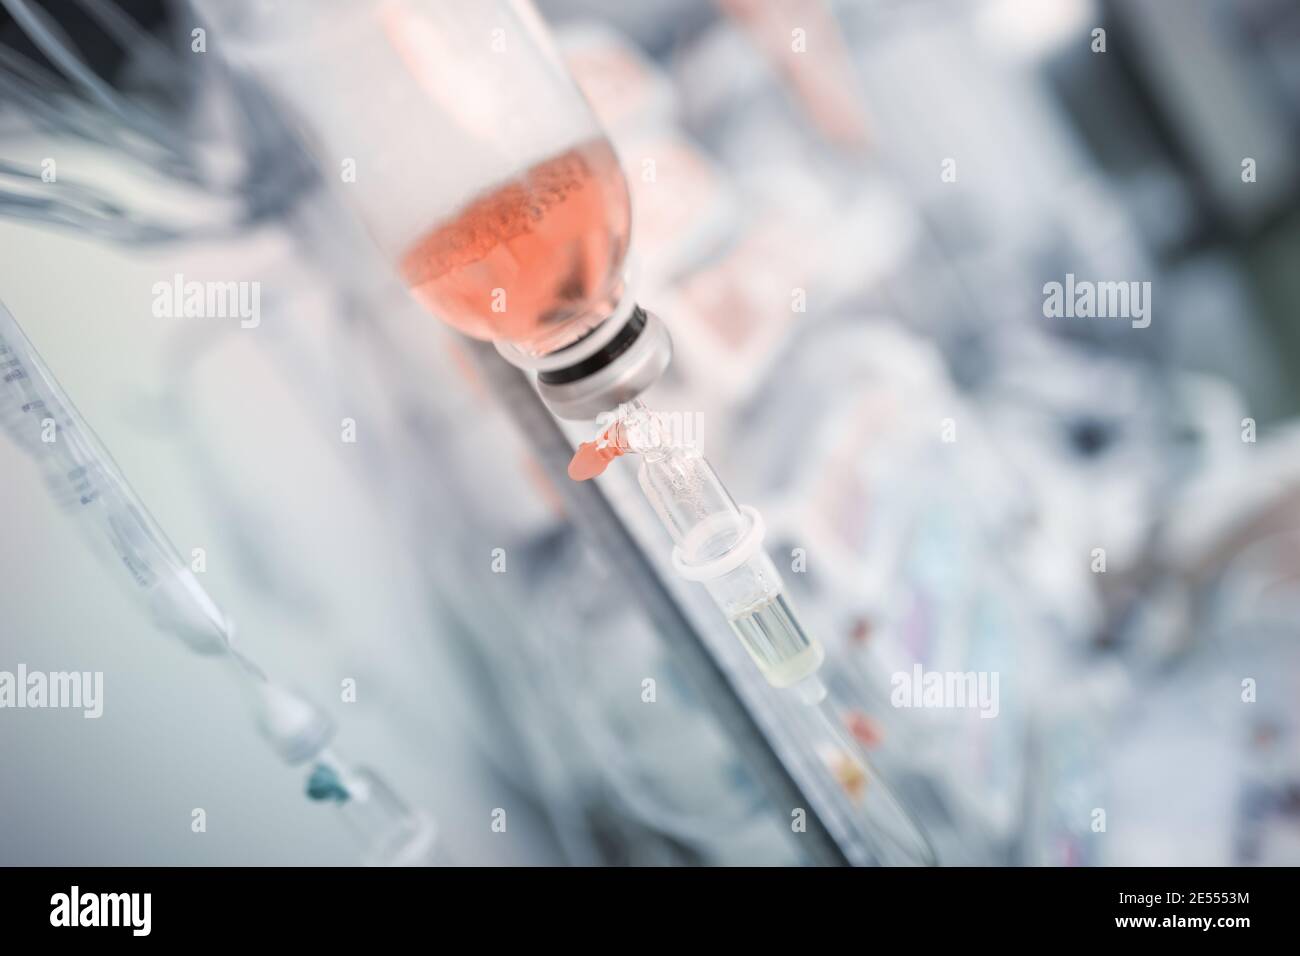 Intravenous infusion of medical solution. Stock Photo